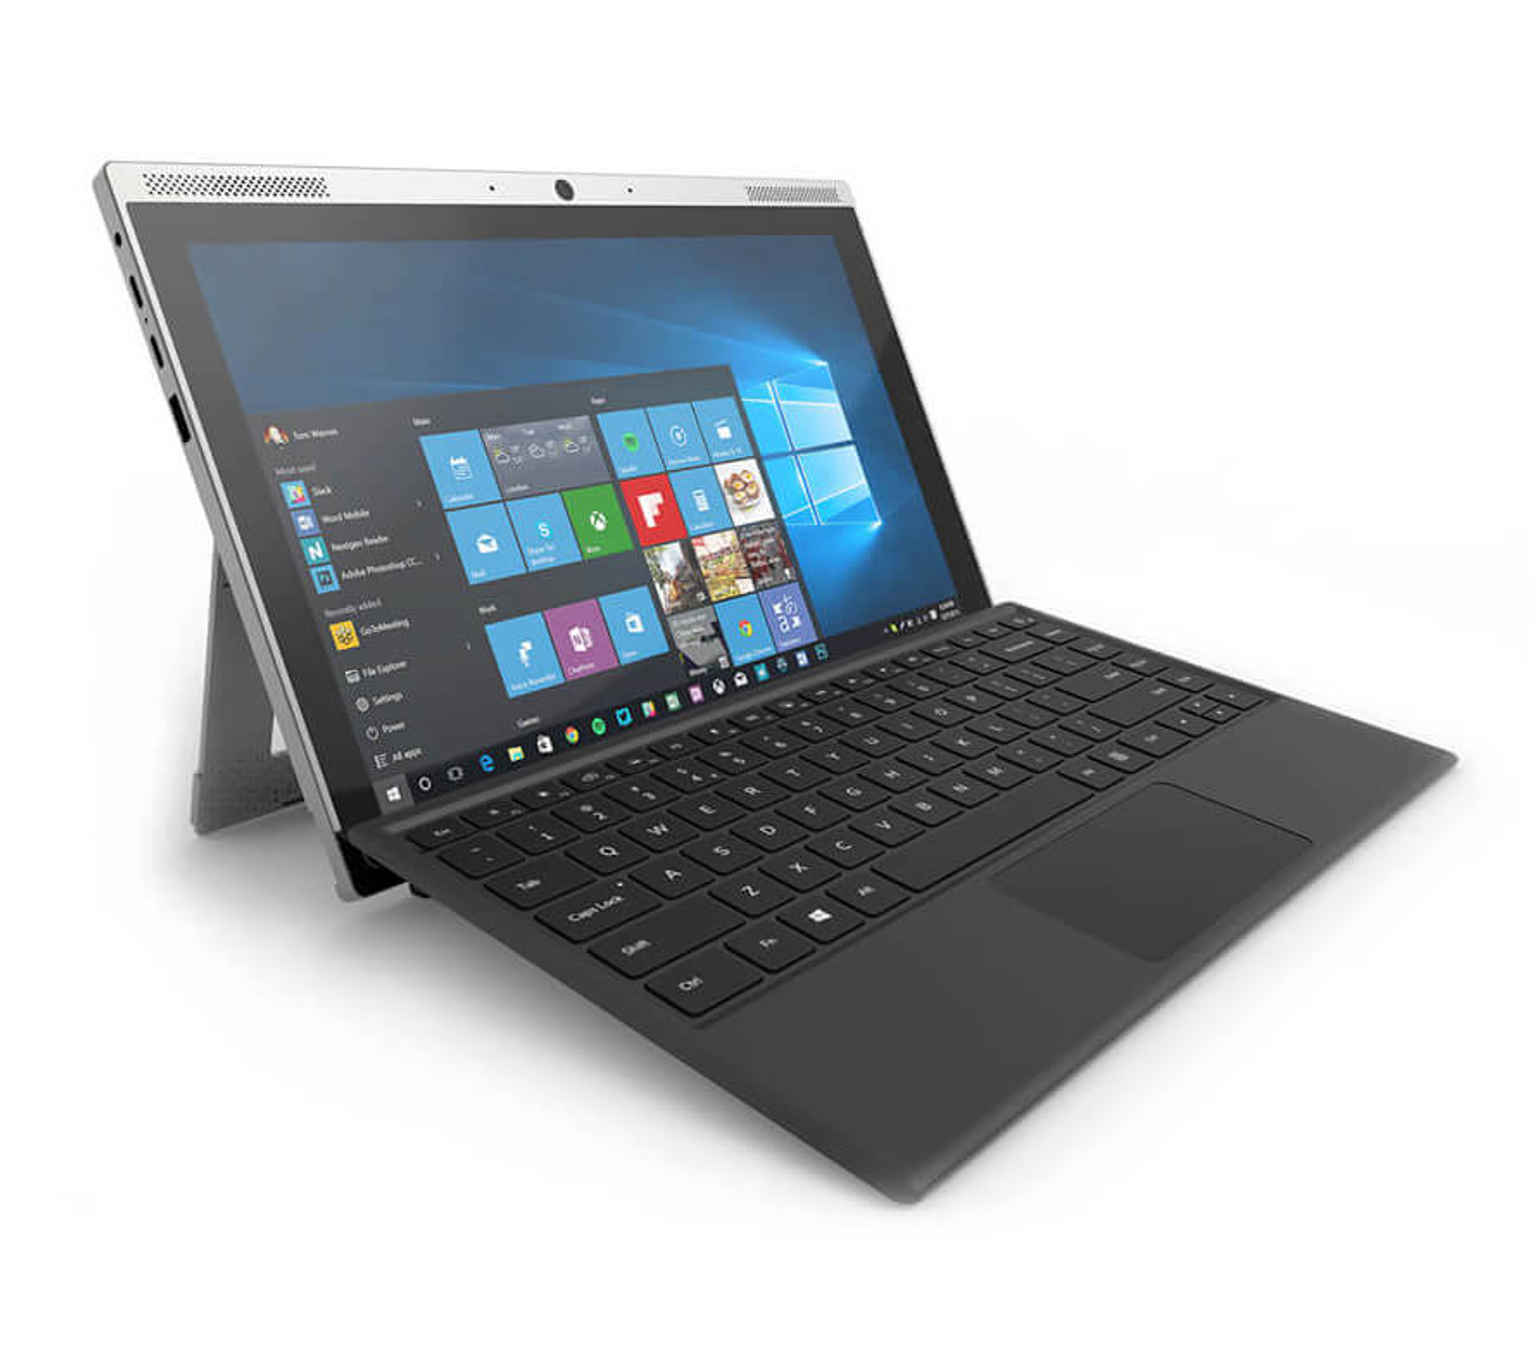 Smartron tbook flex 2in1 laptop with detachable keyboard launched